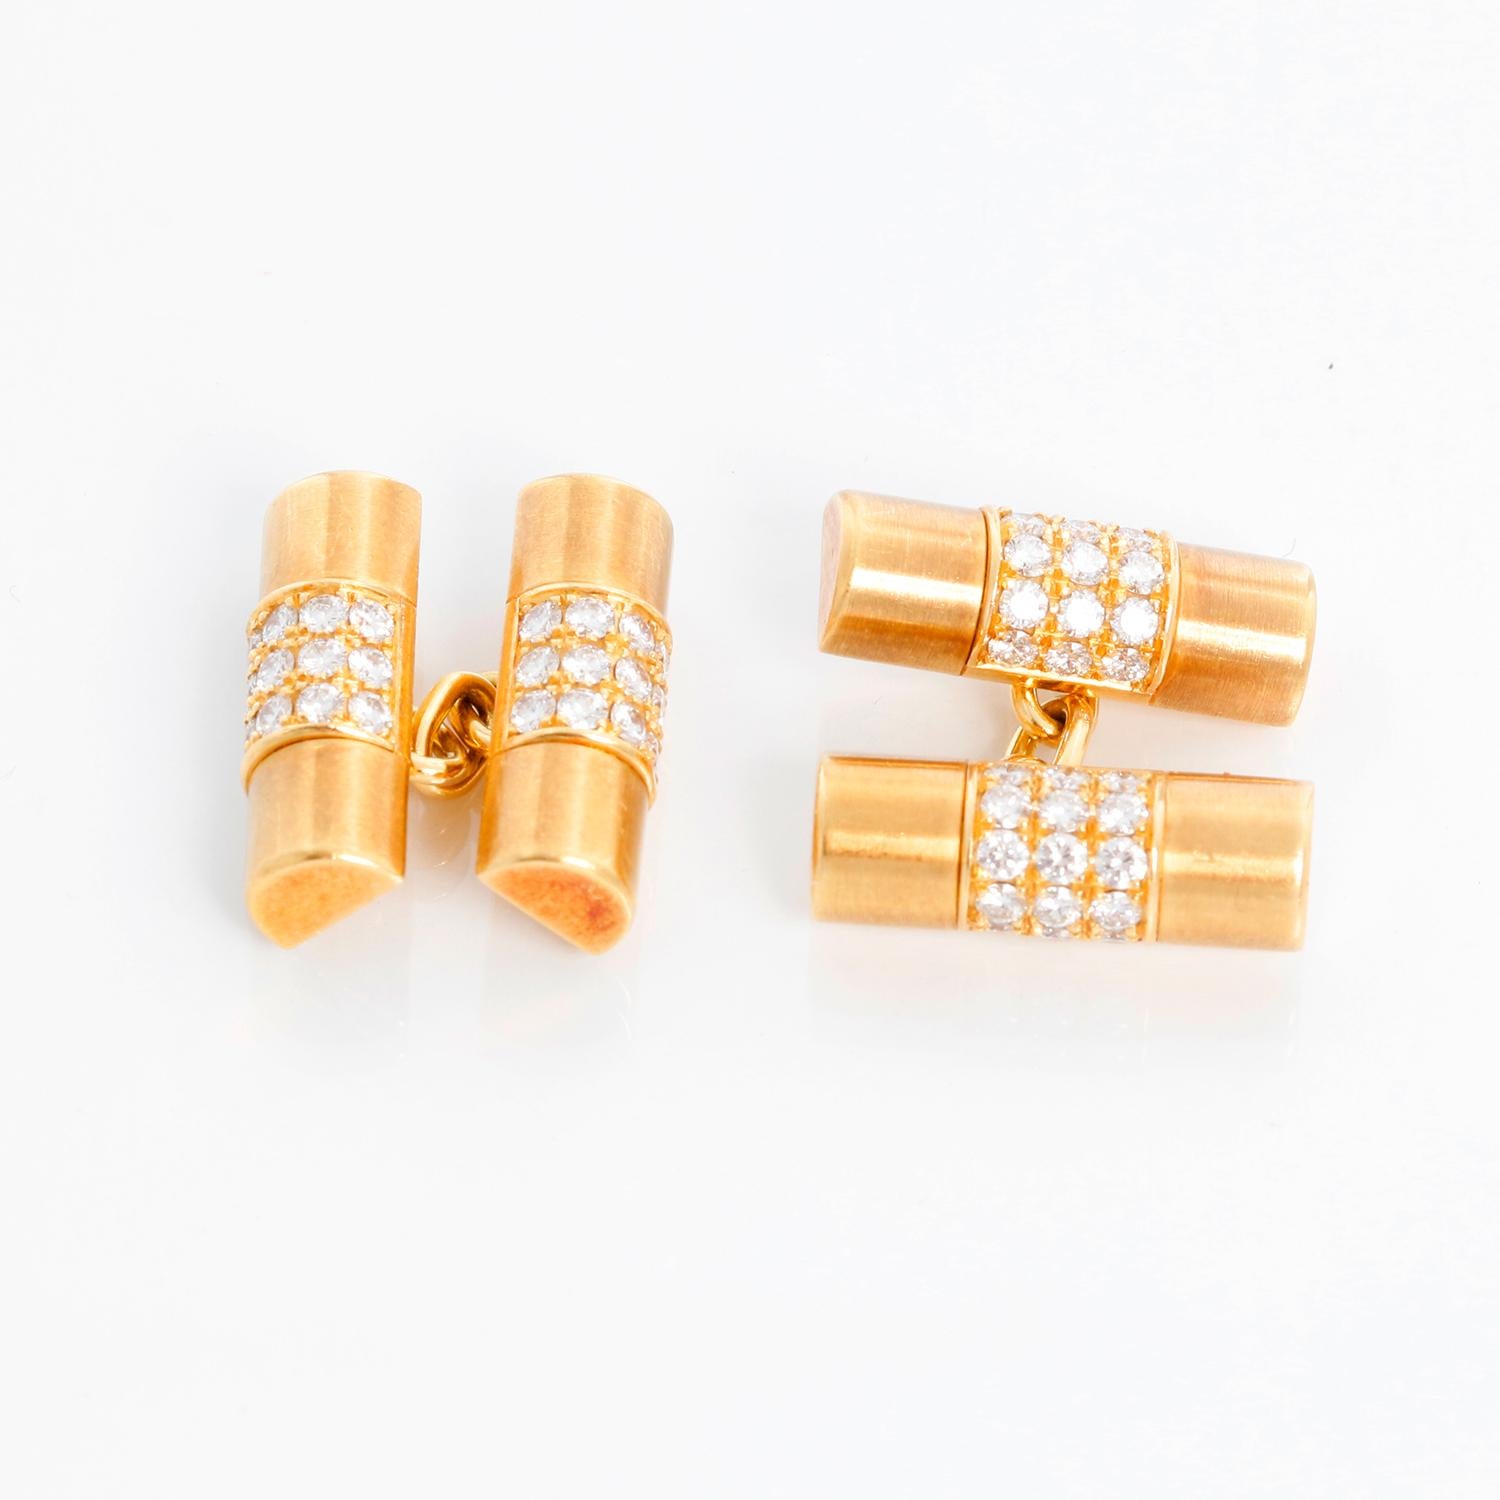 Very Rare 18k Yellow Gold  Rolex Diamond  Cuff Links - These are very rare 18k yellow gold genuine Rolex cuff links. Cuff links are in the shape of  Rolex President band links with pave diamonds links and are signed.  Each link measures apx.